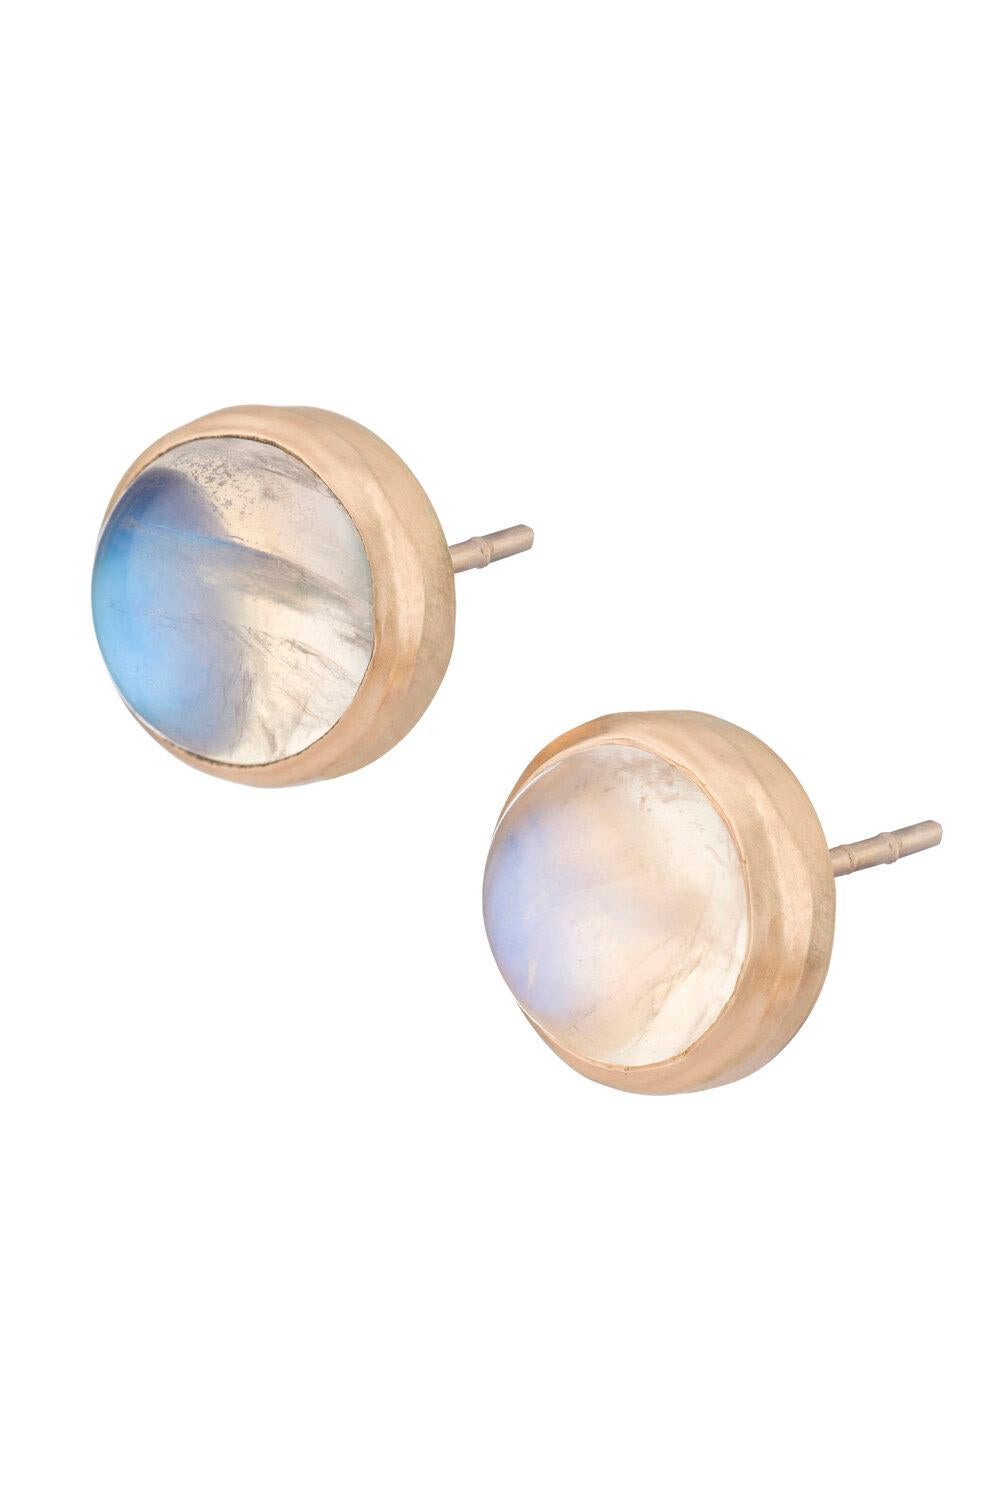 OUROBOROS rainbow moonstone round cabochon studs in a simple frame of 18kt gold studs. Blue and white rainbow moonstone options.

OUROBOROS’ commitment to using only the most unique stones set in 18 or 24 Karat gold, is matched only to Olivia’s